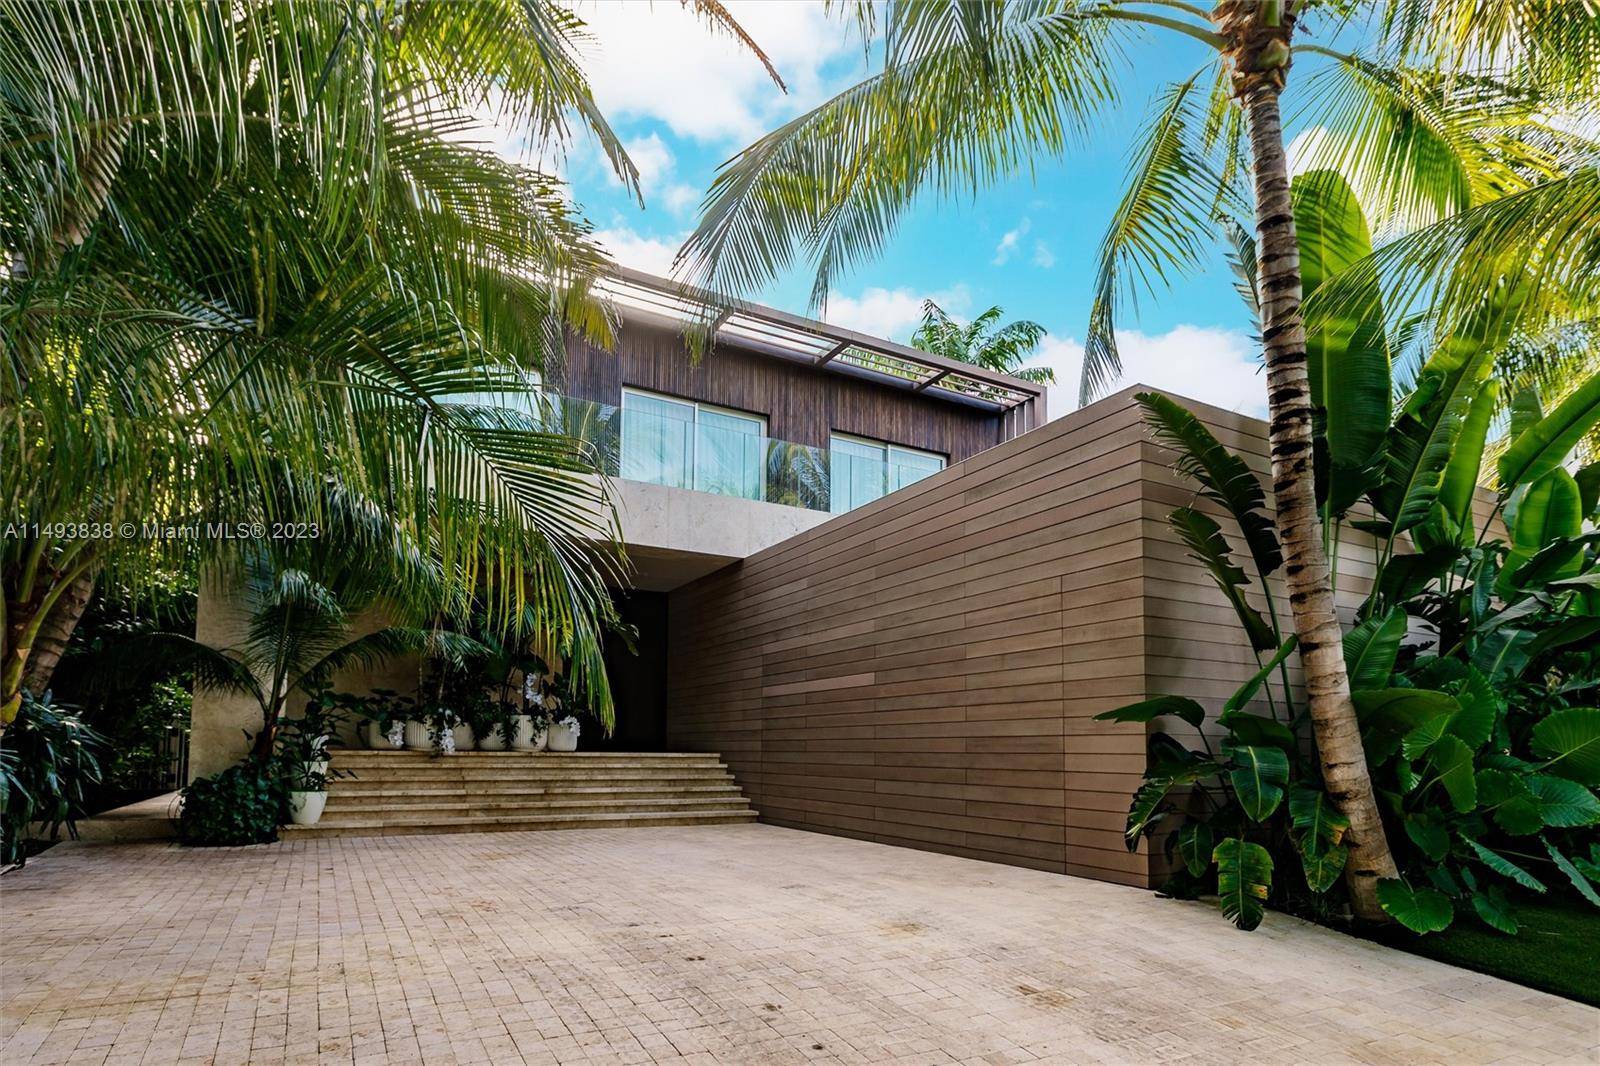 Stunning Luxurious 5393 sq ft minimalistic masterpiece located on one of the most sought after islands on Miami Beach.